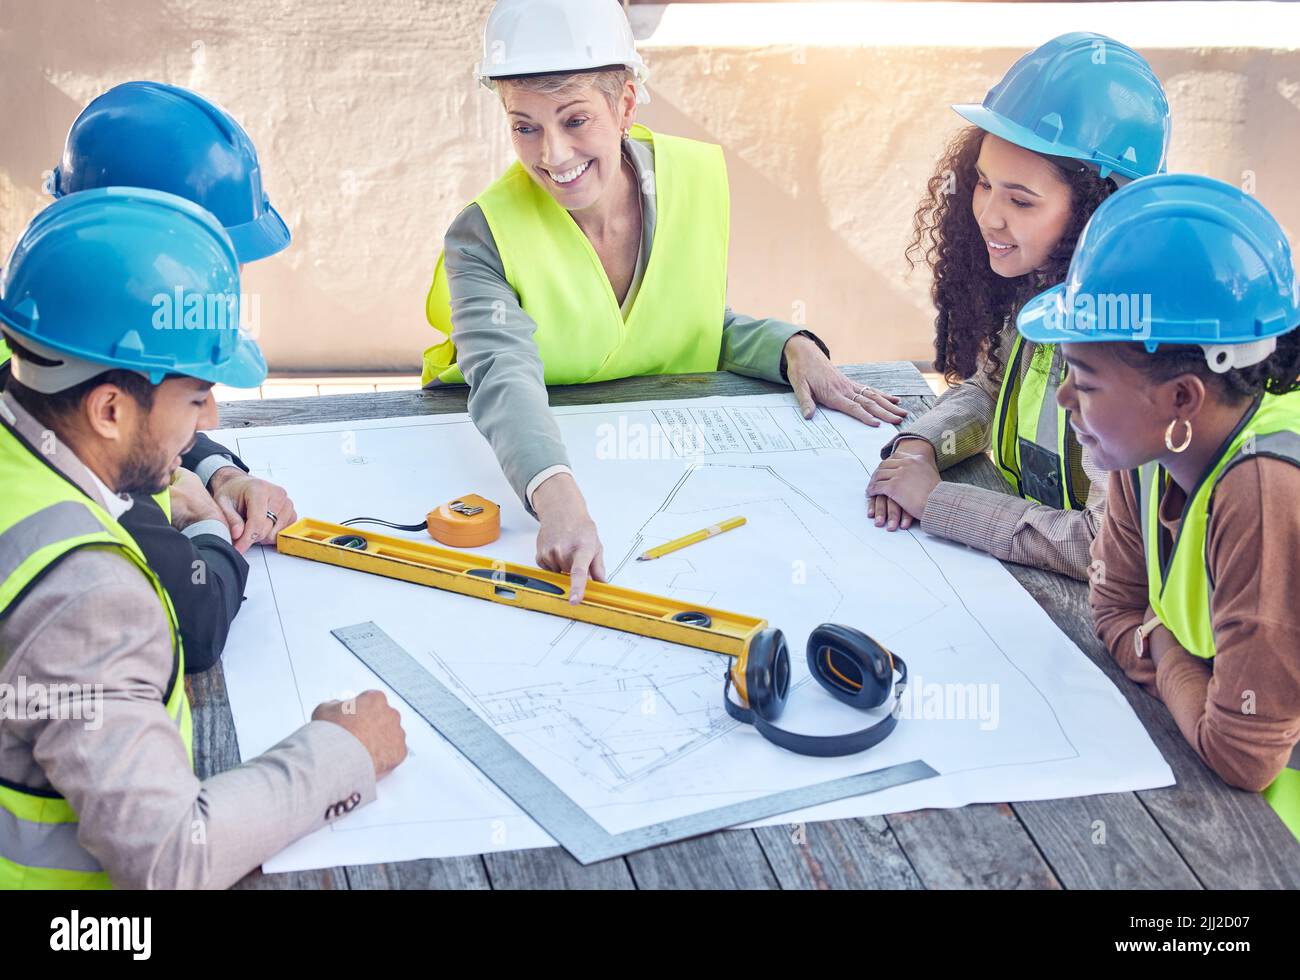 Making sure everything goes according to plan. a group of construction workers discussing blueprints while working on a building site. Stock Photo